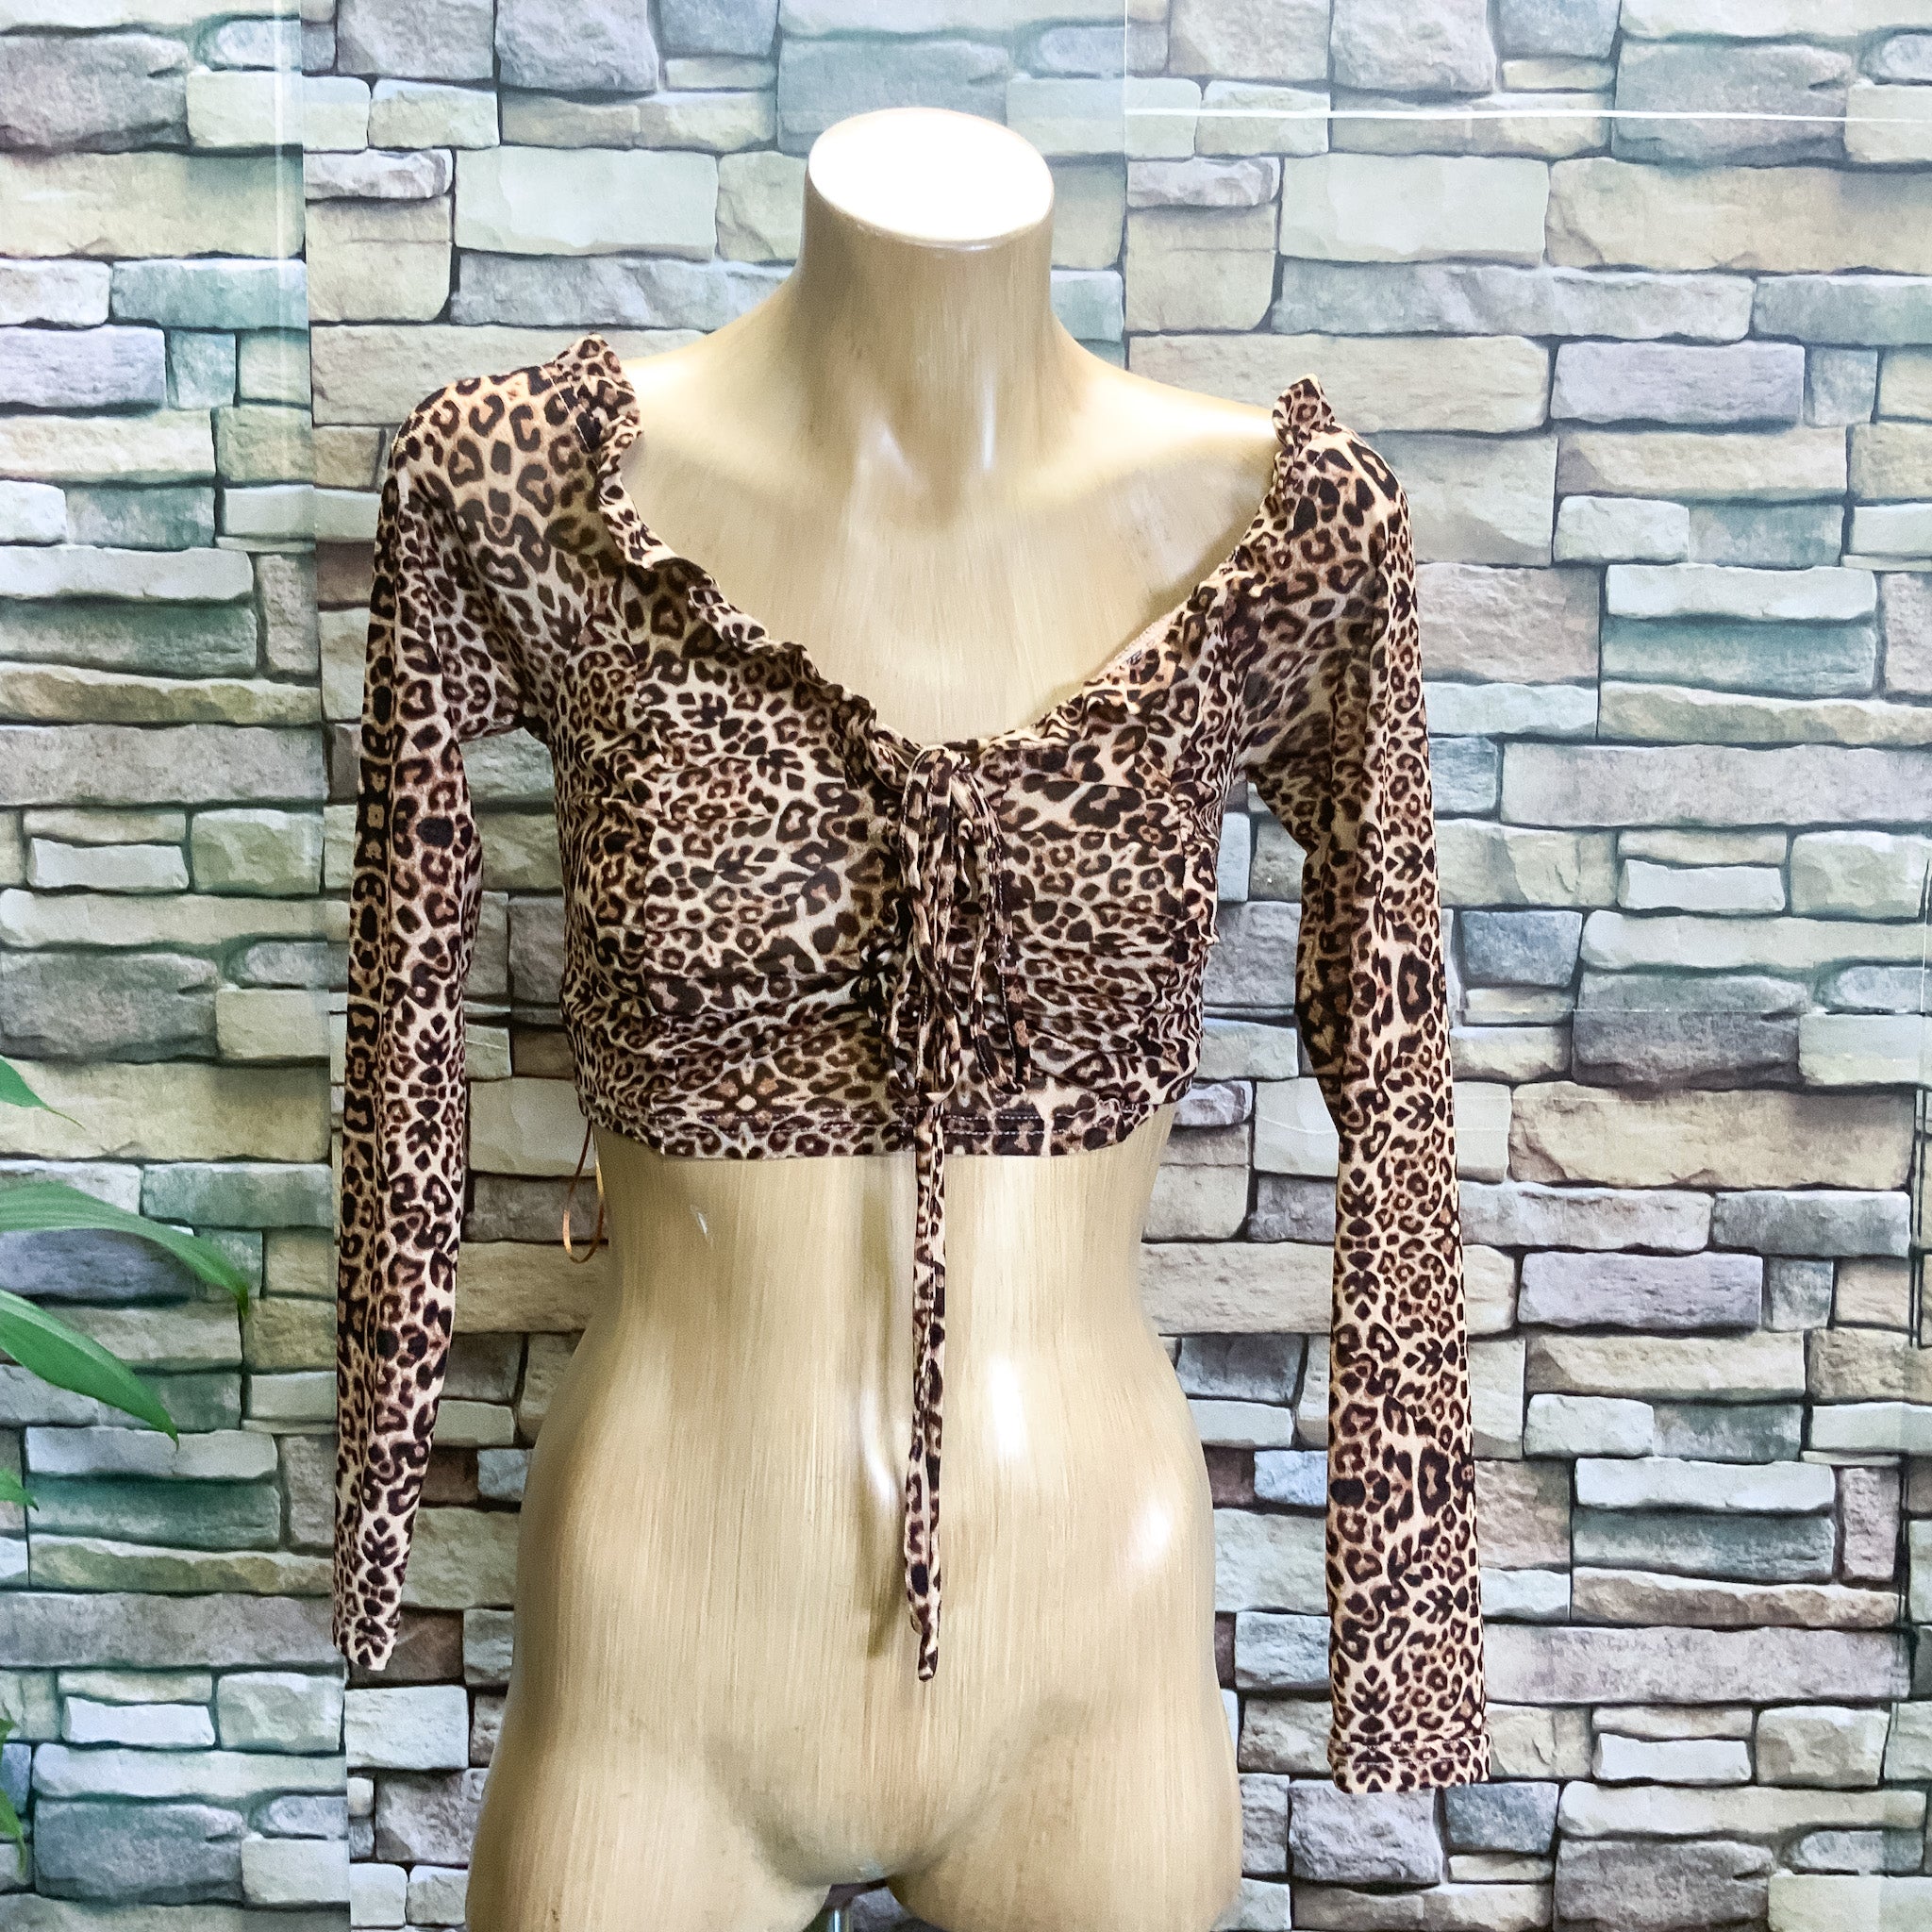 LUCK & TROUBLE Mesh Long Sleeve Brown Leopard Print Crop Top - Size 10/12